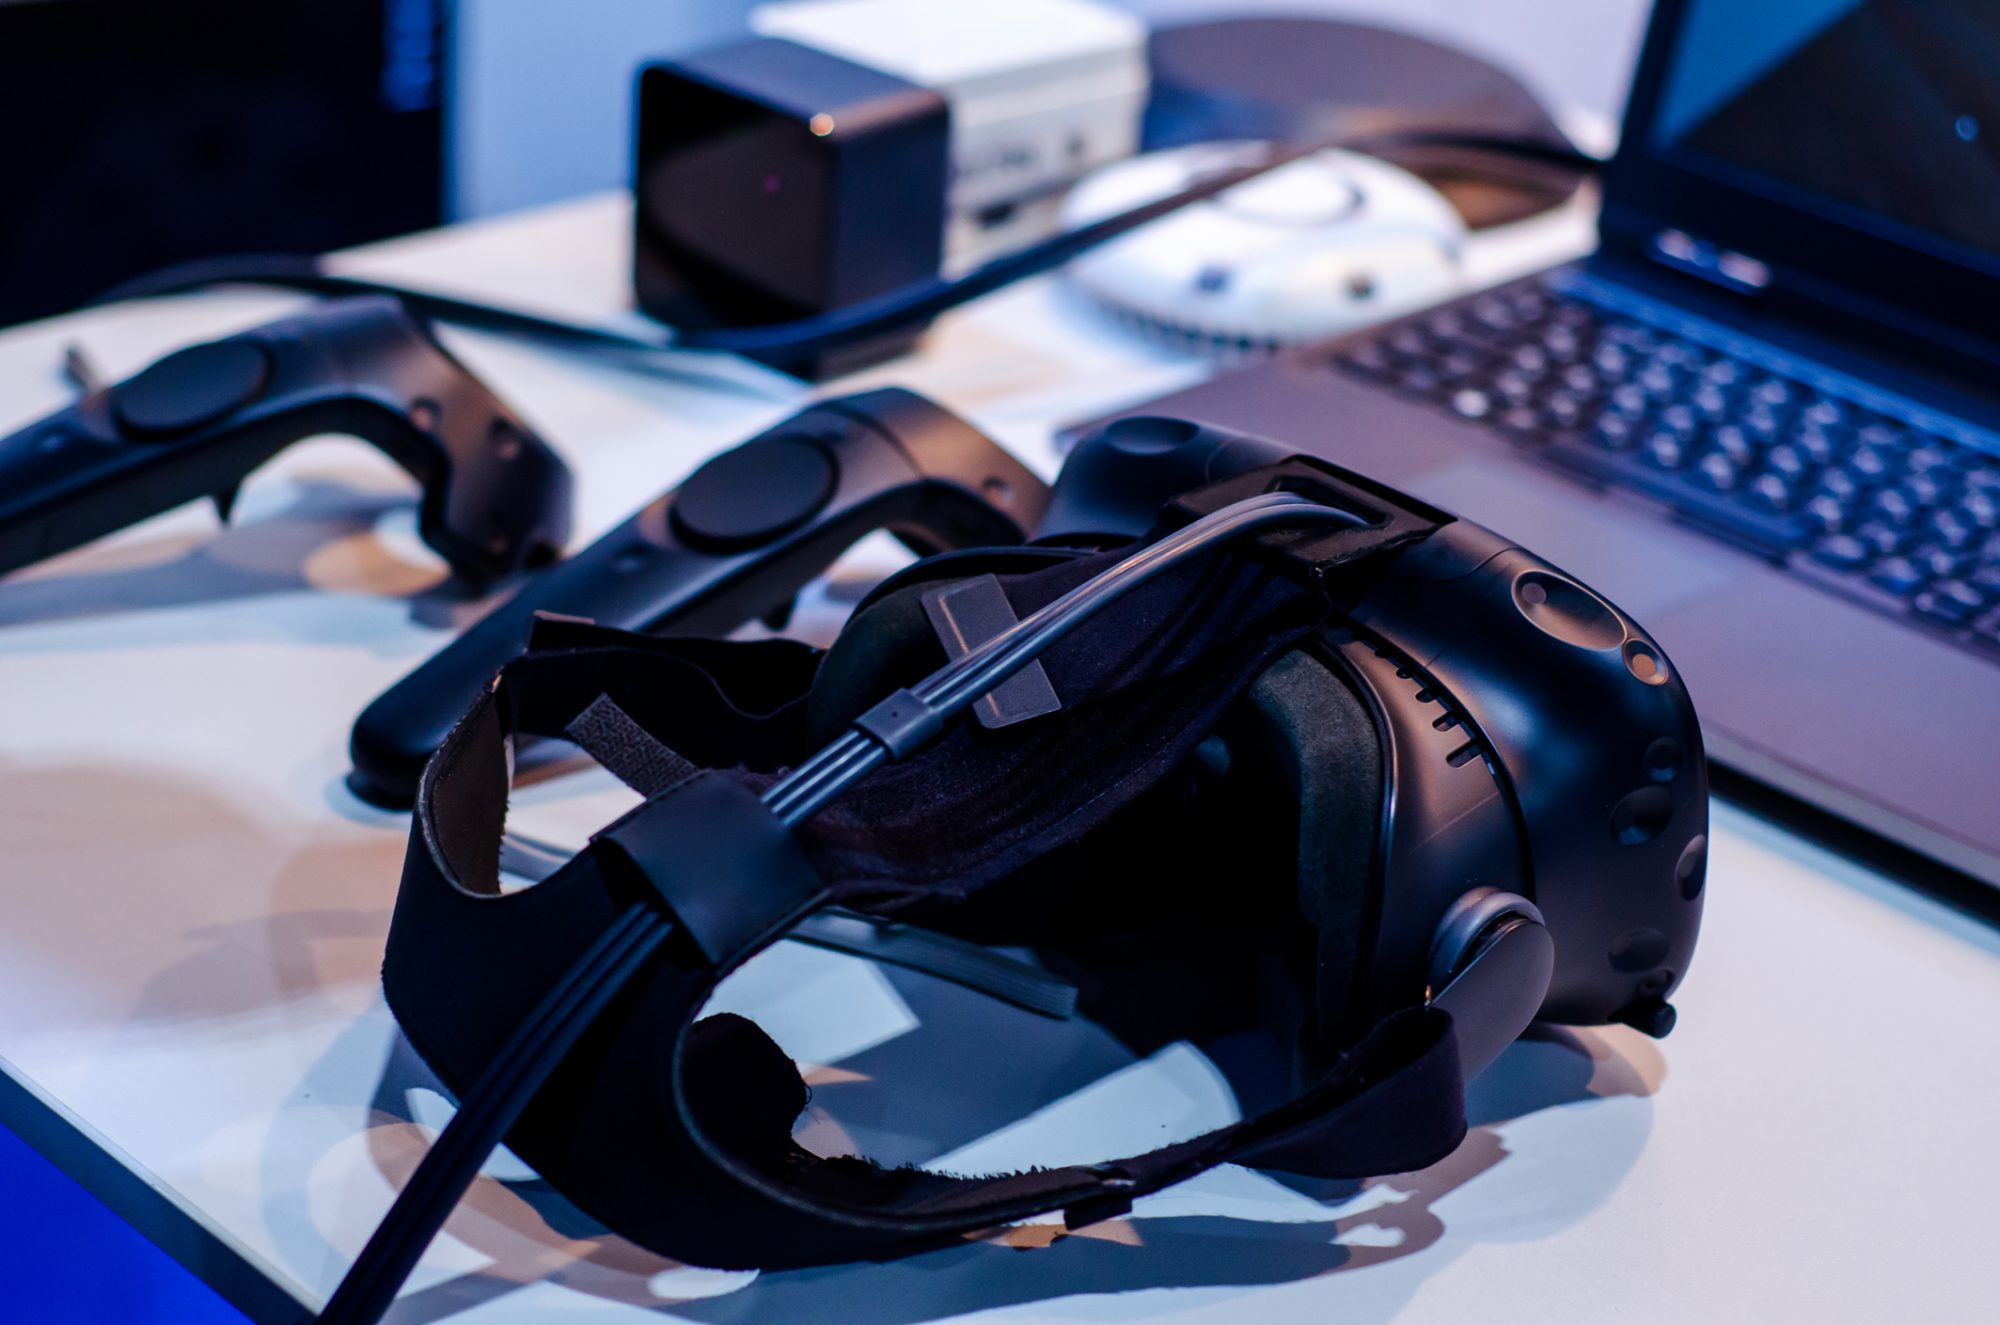 Virtual reality system. VR headsets with controllers